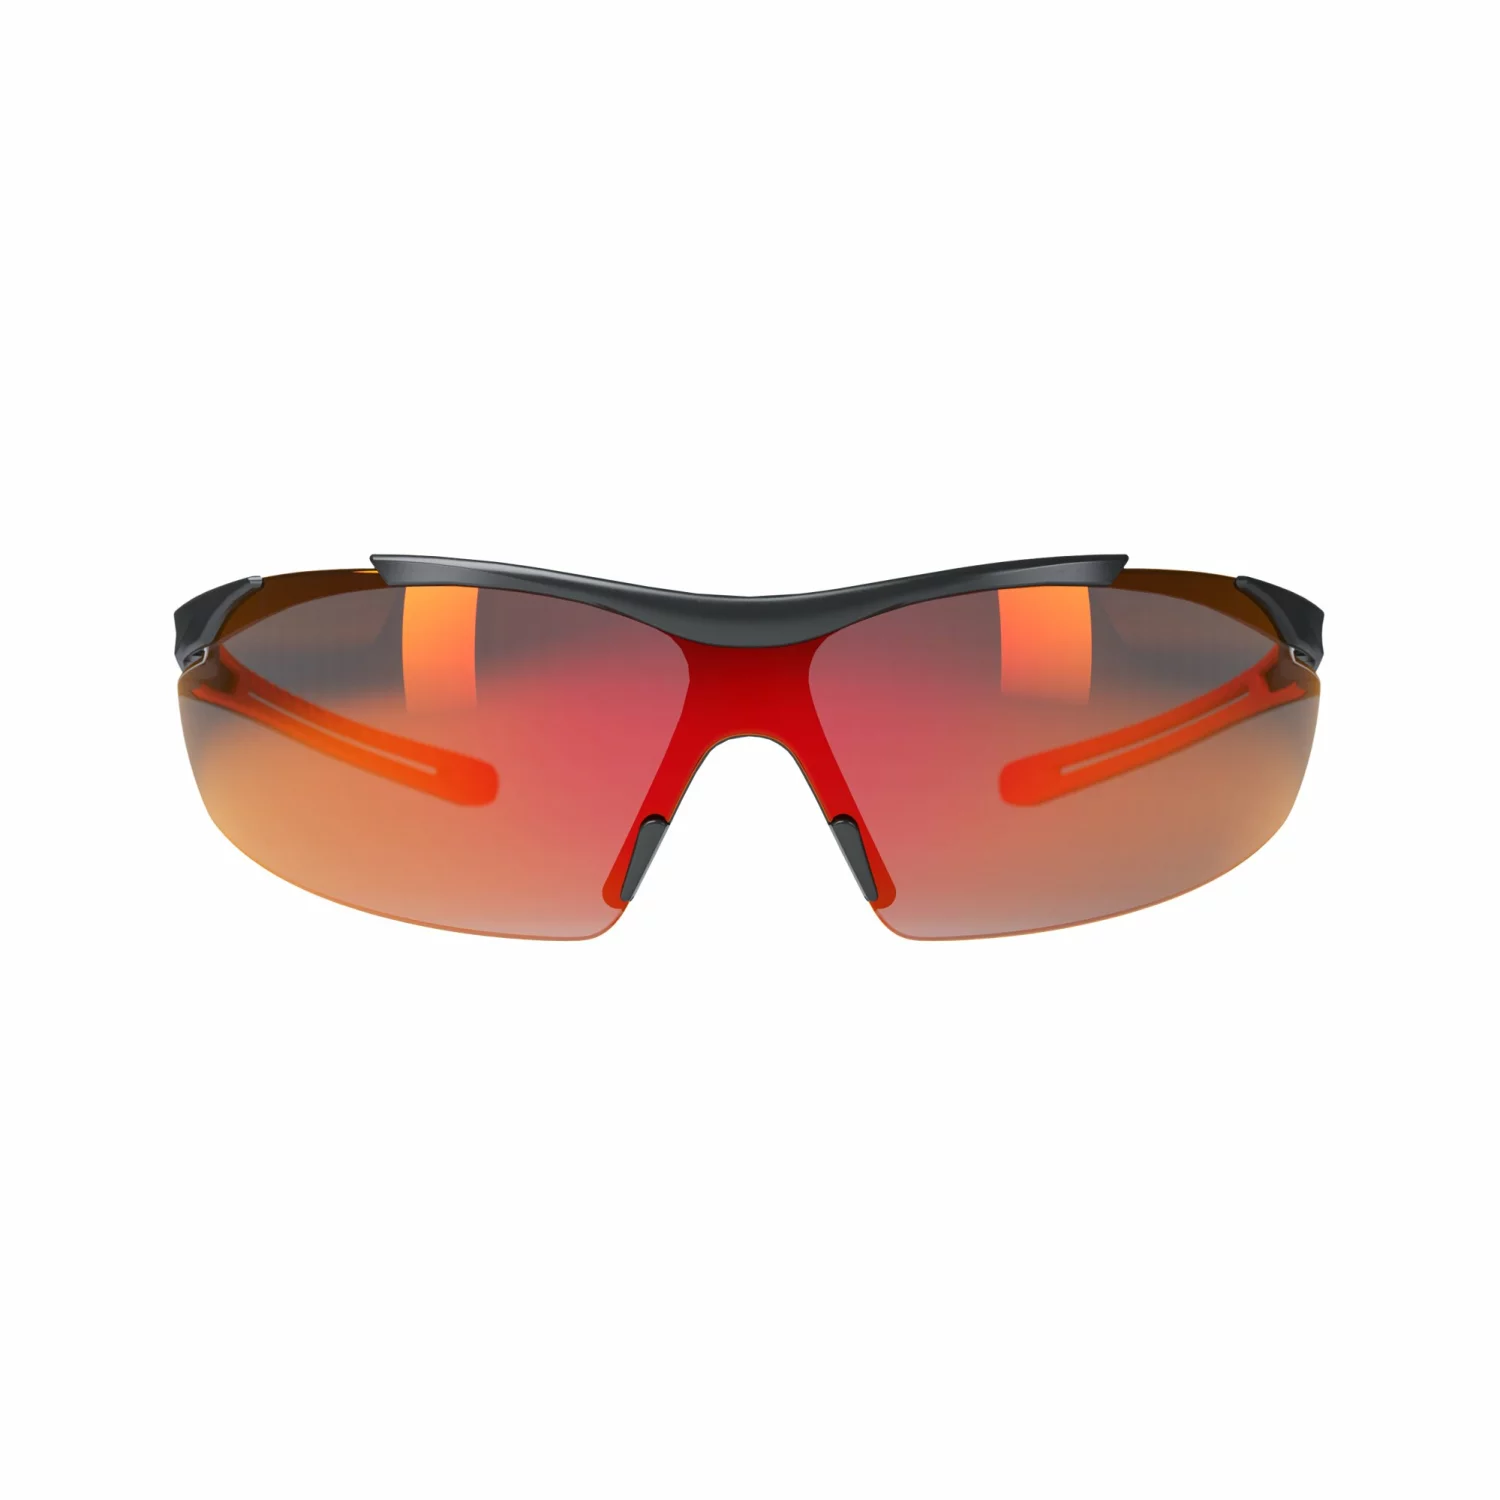 Hellberg Safety 23333-001 Lunettes de protection